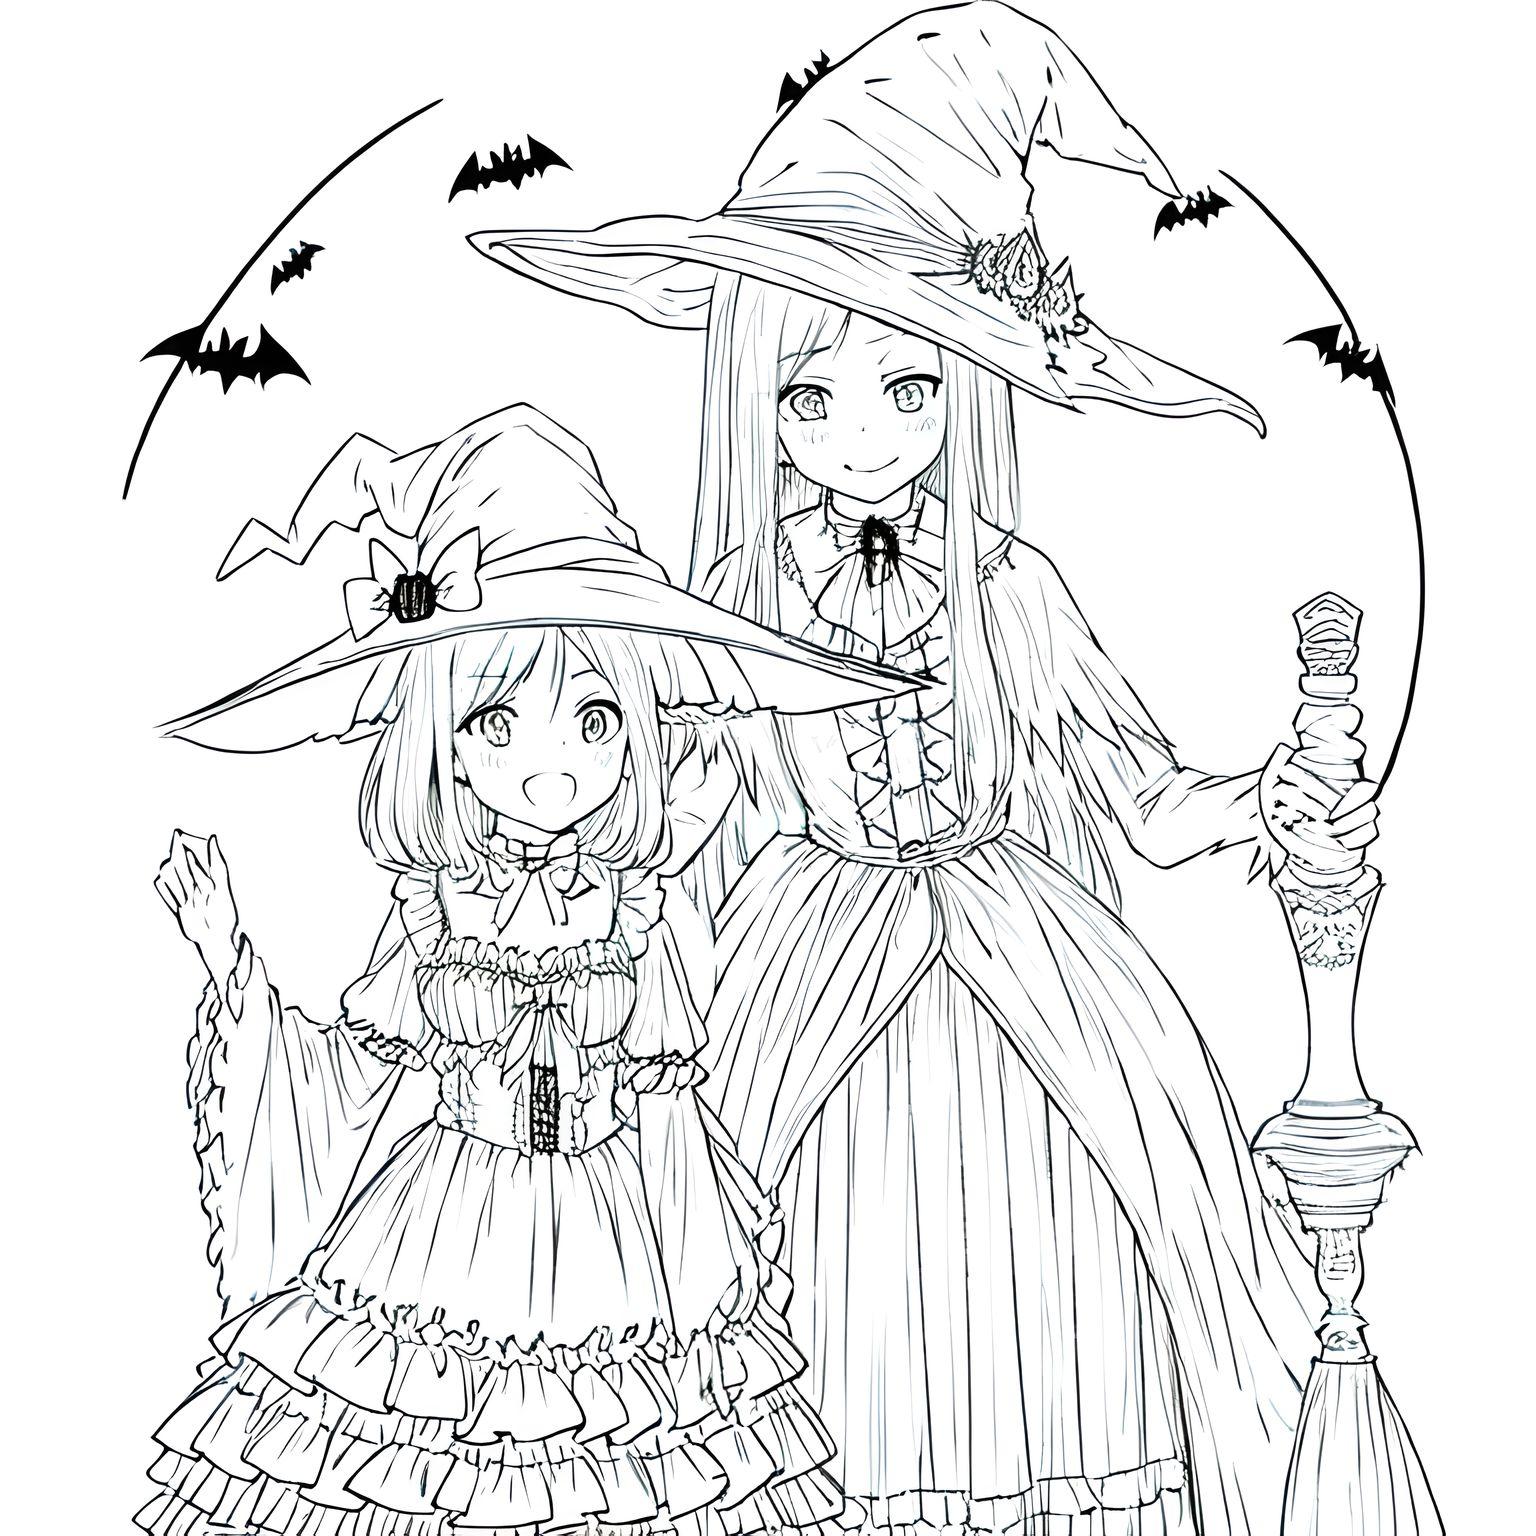 Halloween Coloring Page by spades7717 on DeviantArt